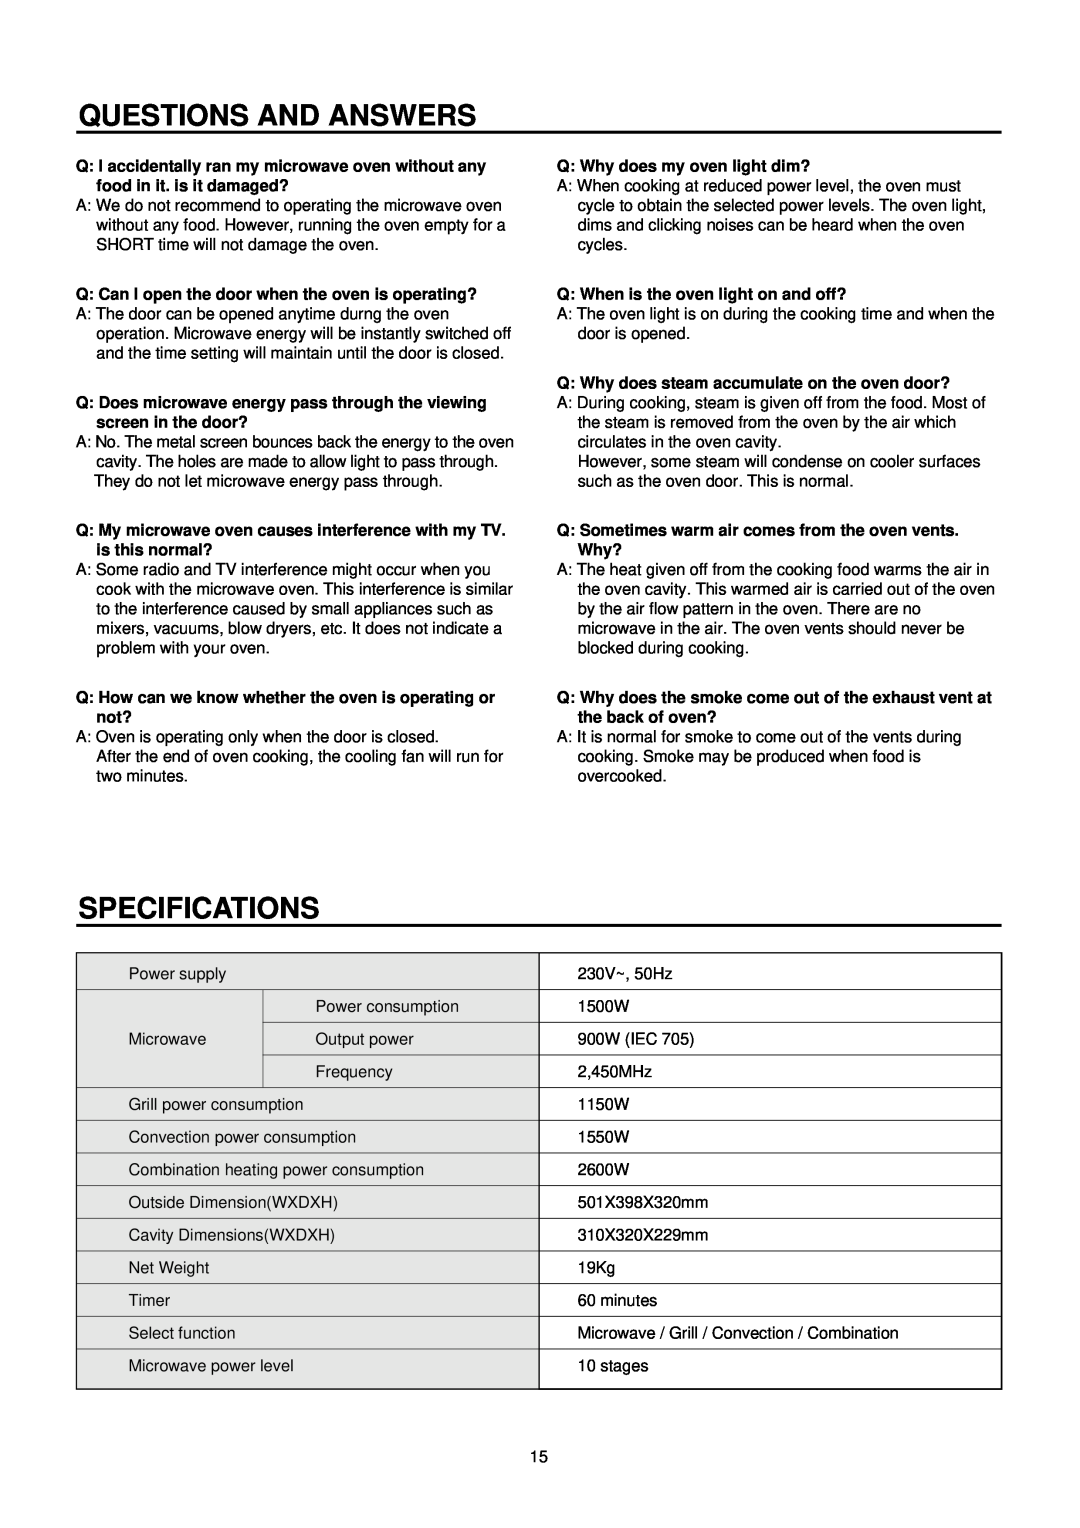 Daewoo KOC-873TSL manual Questions And Answers, Specifications, Q Can I open the door when the oven is operating? 